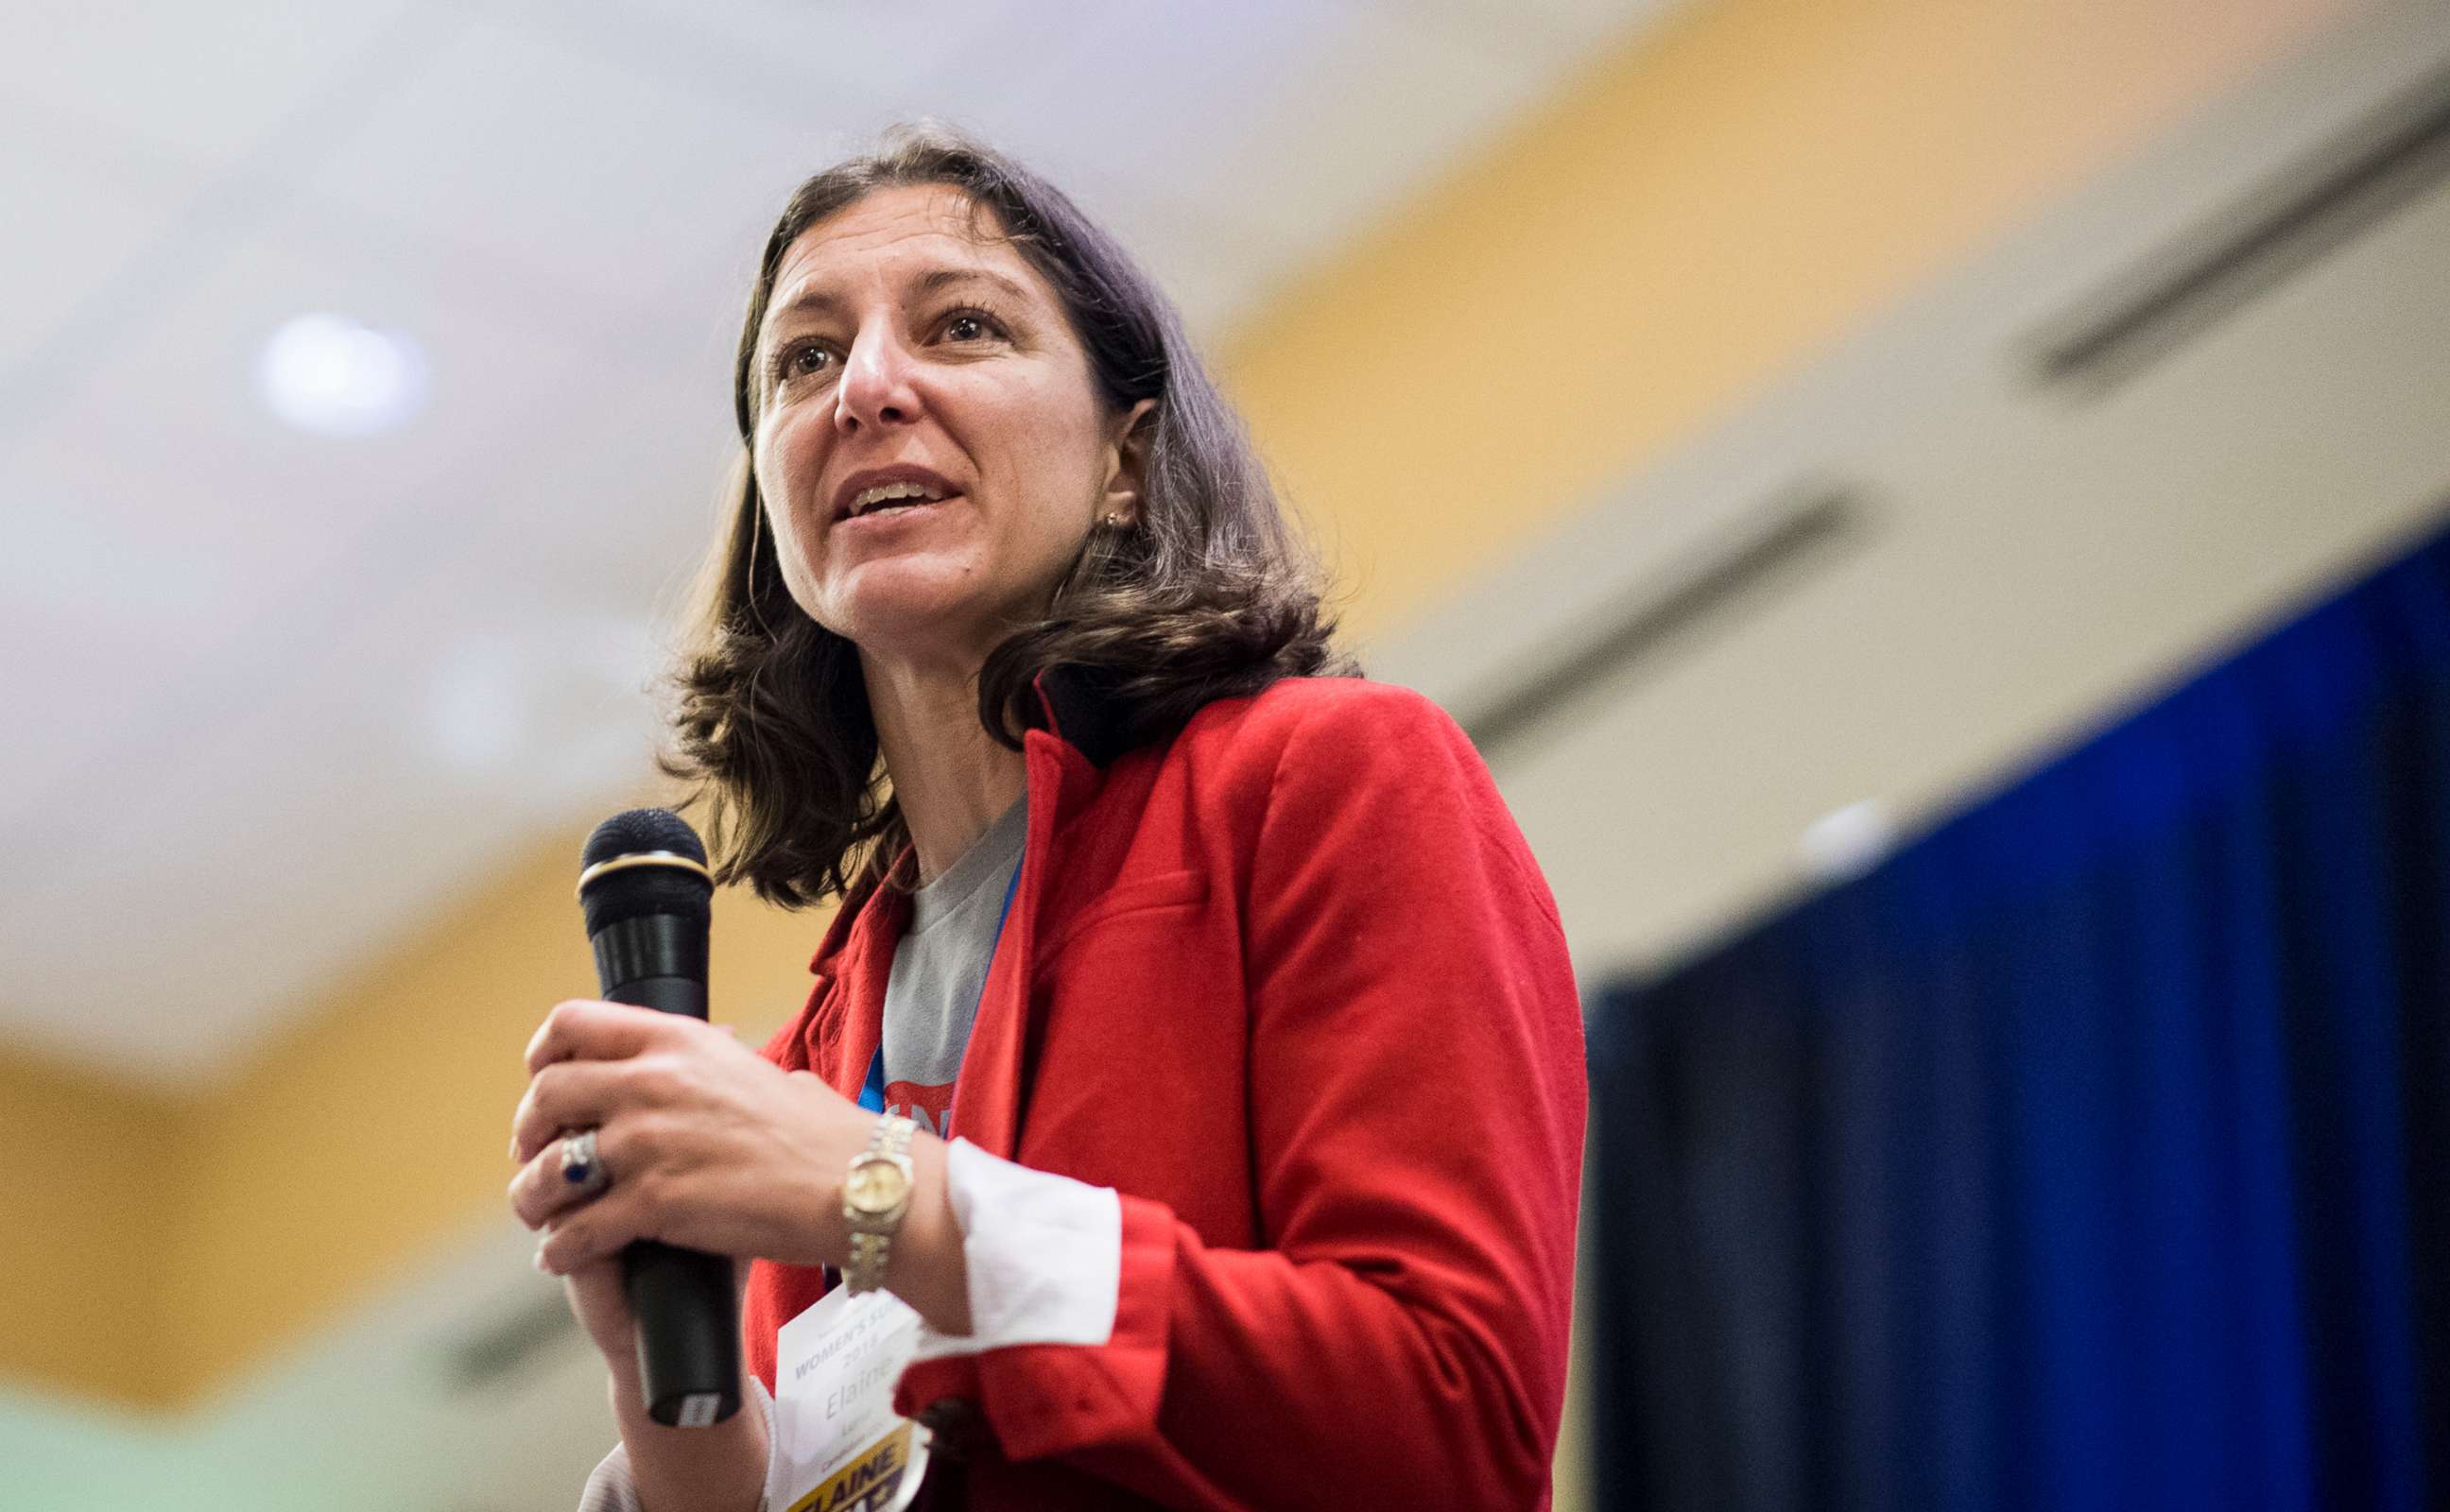 PHOTO: Elaine Luria, Democratic candidate for the 2nd congressional district of Virginia, speaks during the Women's Summit in Herndon, Va., on June 23, 2018.